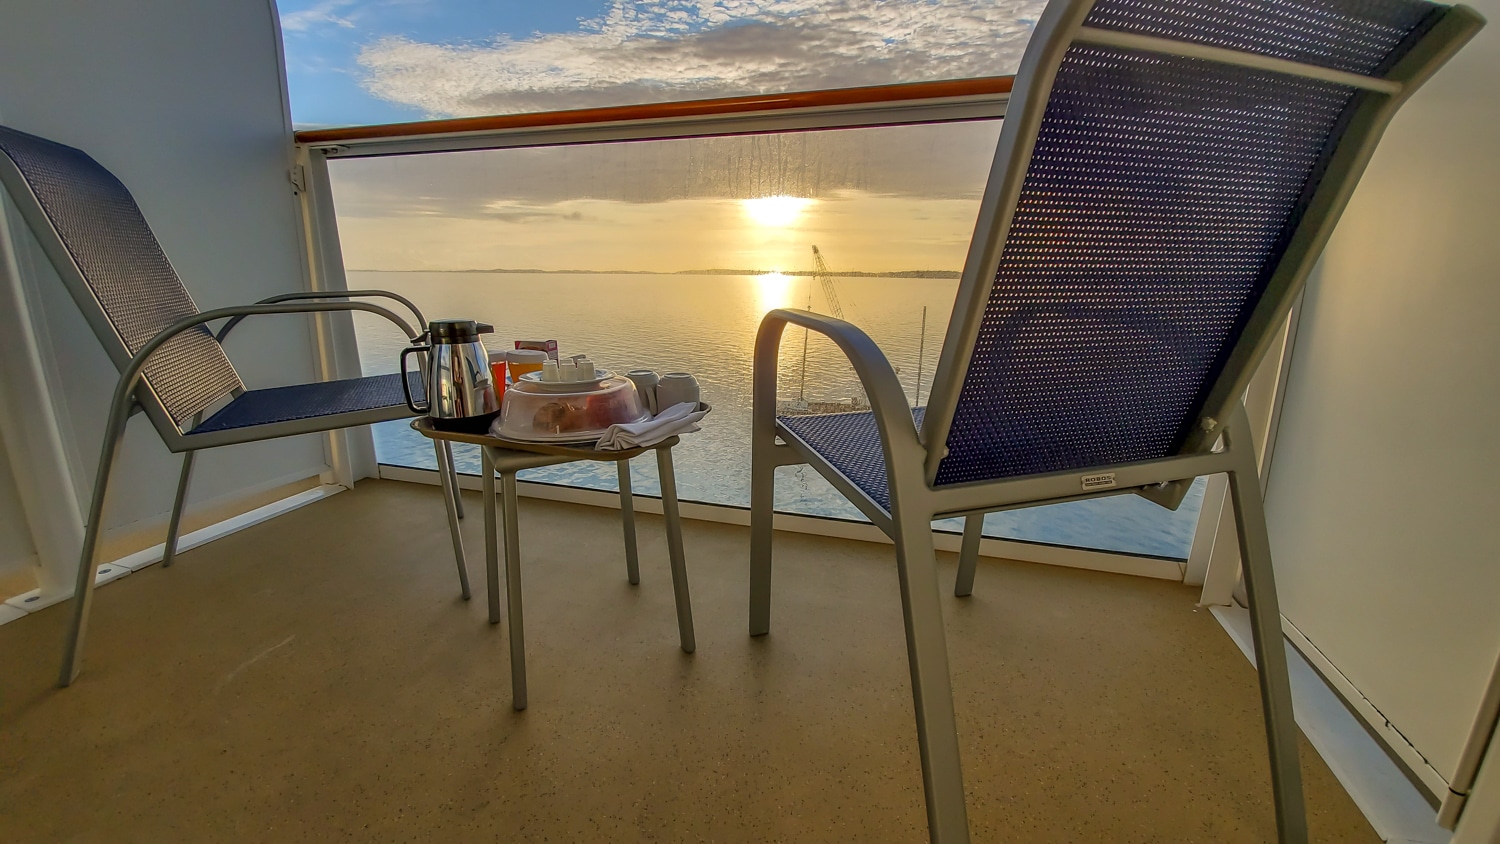 Norwegian Escape balcony with room service breakfast on tray with sunrise